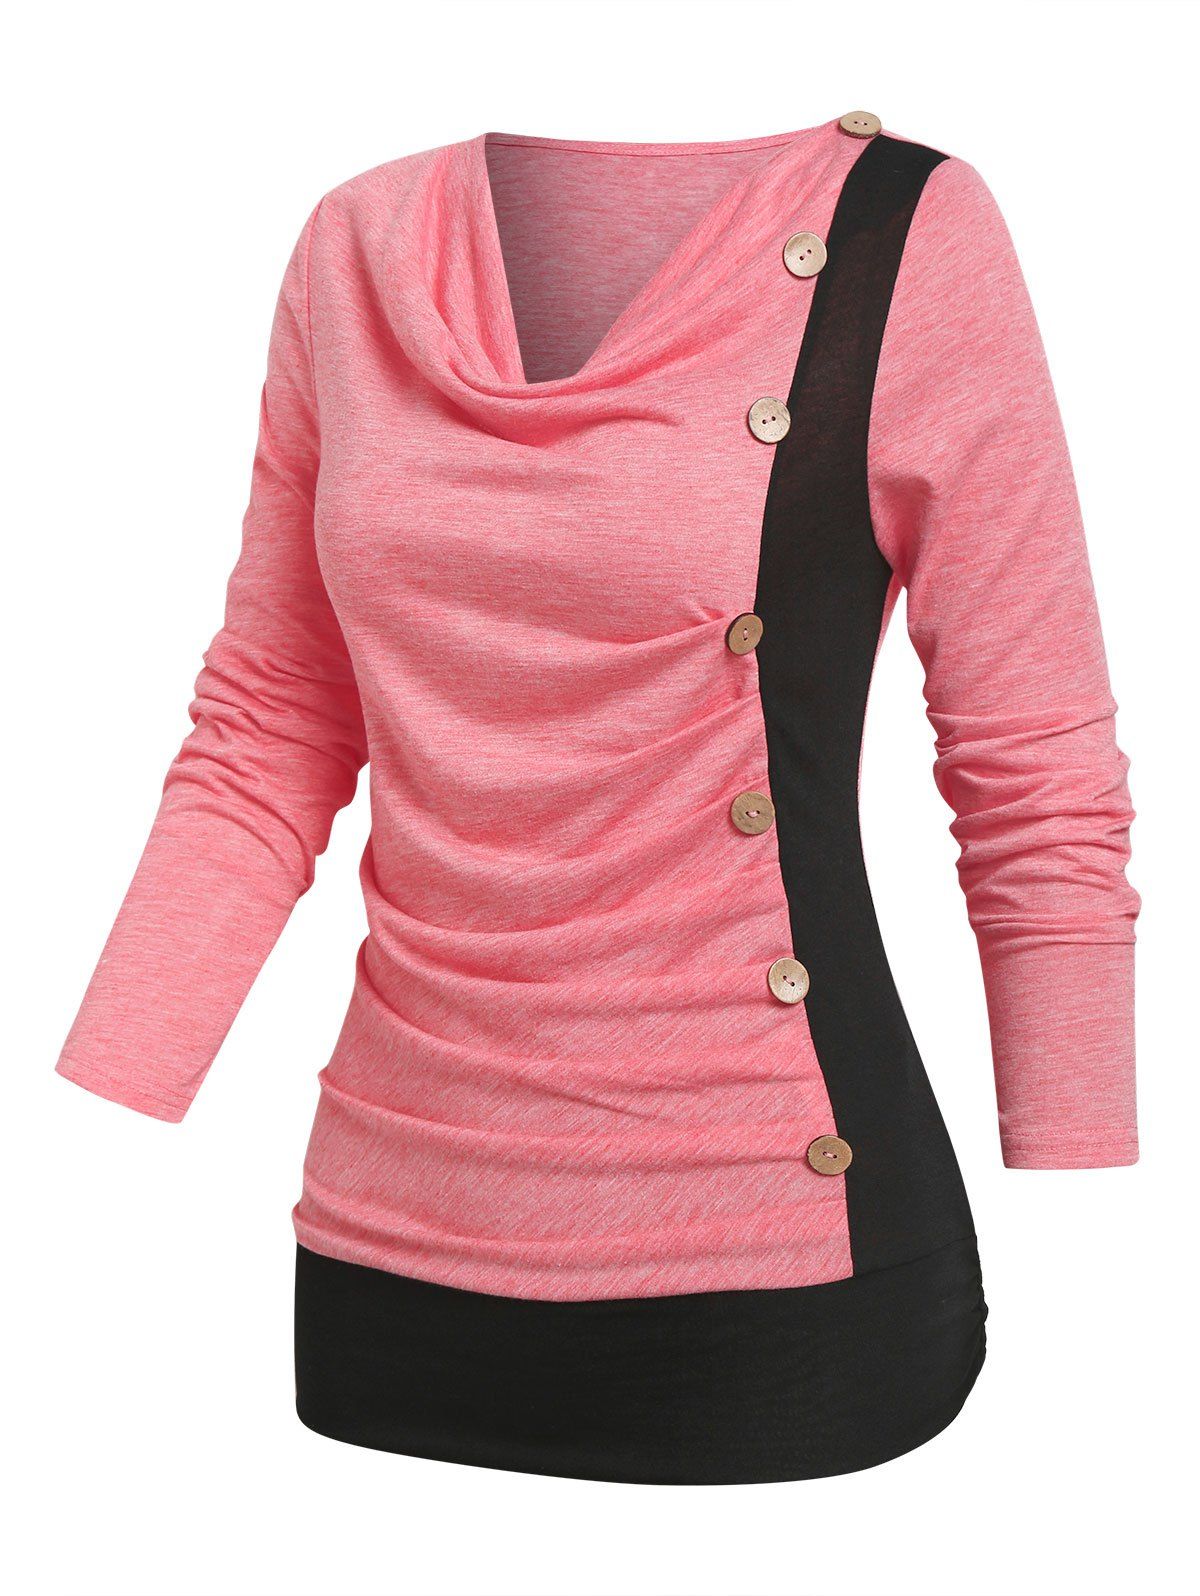 Mock Button Ruched Contrast T-shirt - LIGHT PINK L